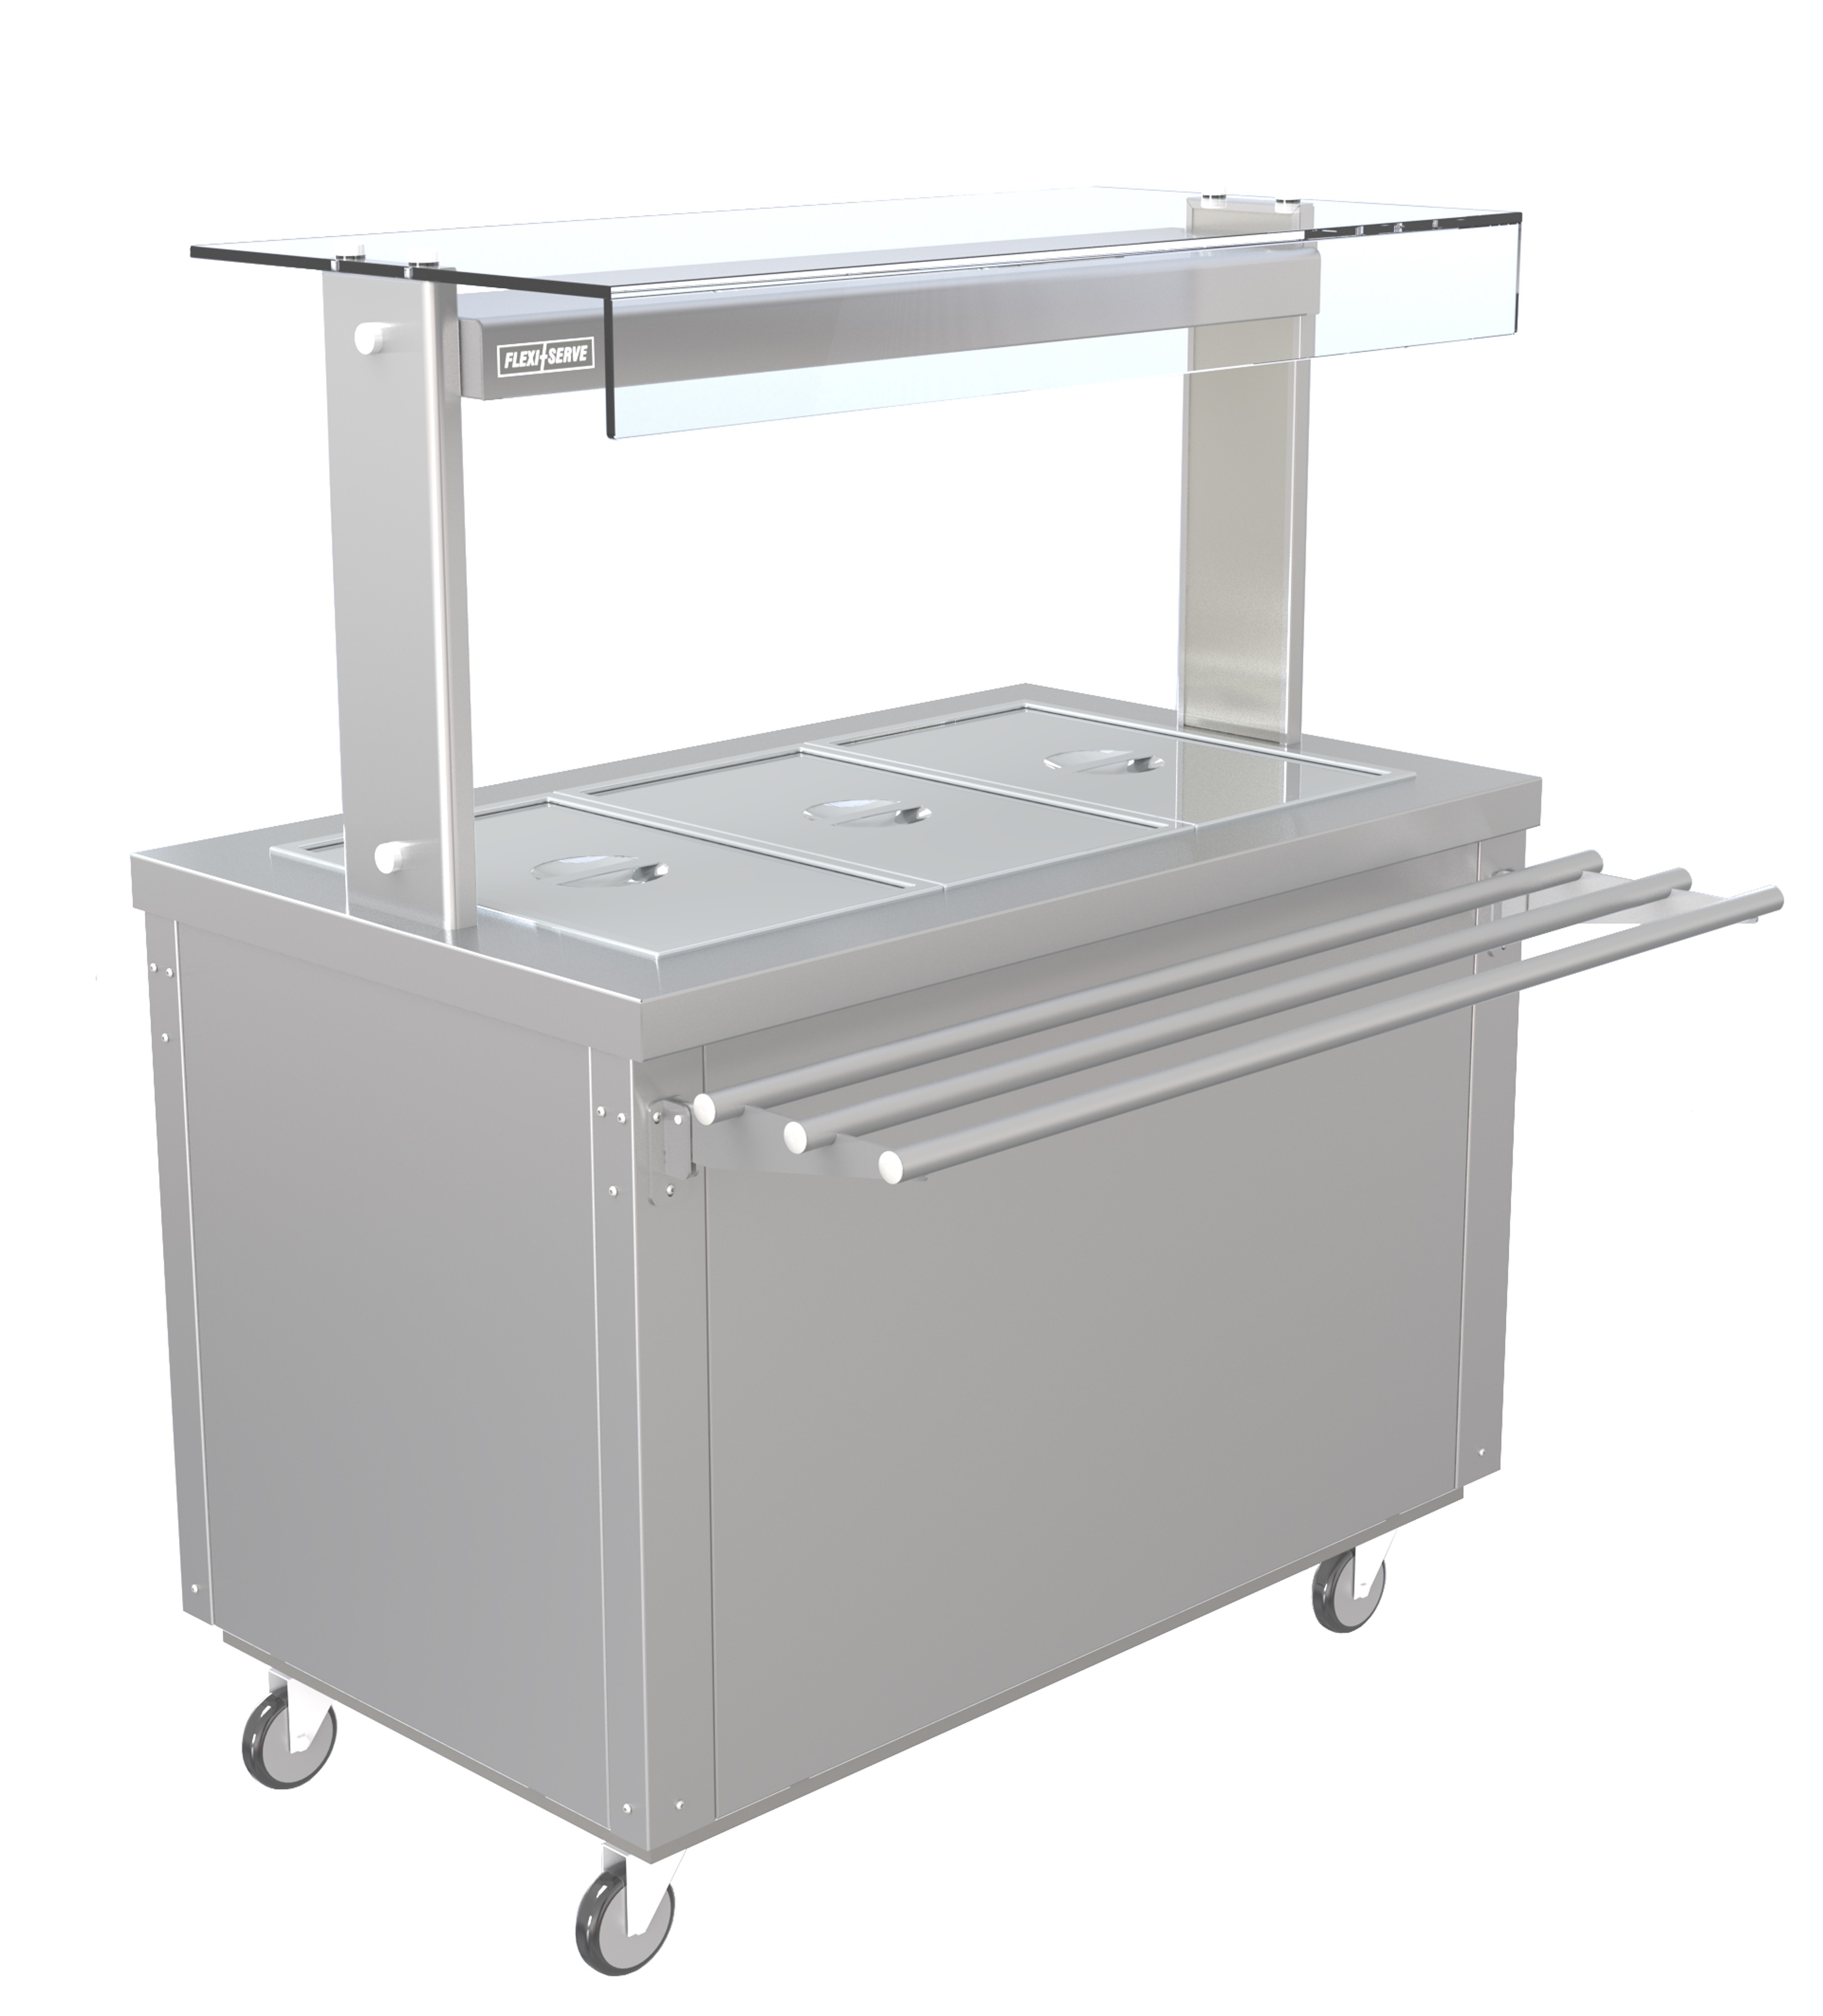 Parry FS-HB4 - Flexi Serve Hot Cupboard with Dry Well Bain Marie